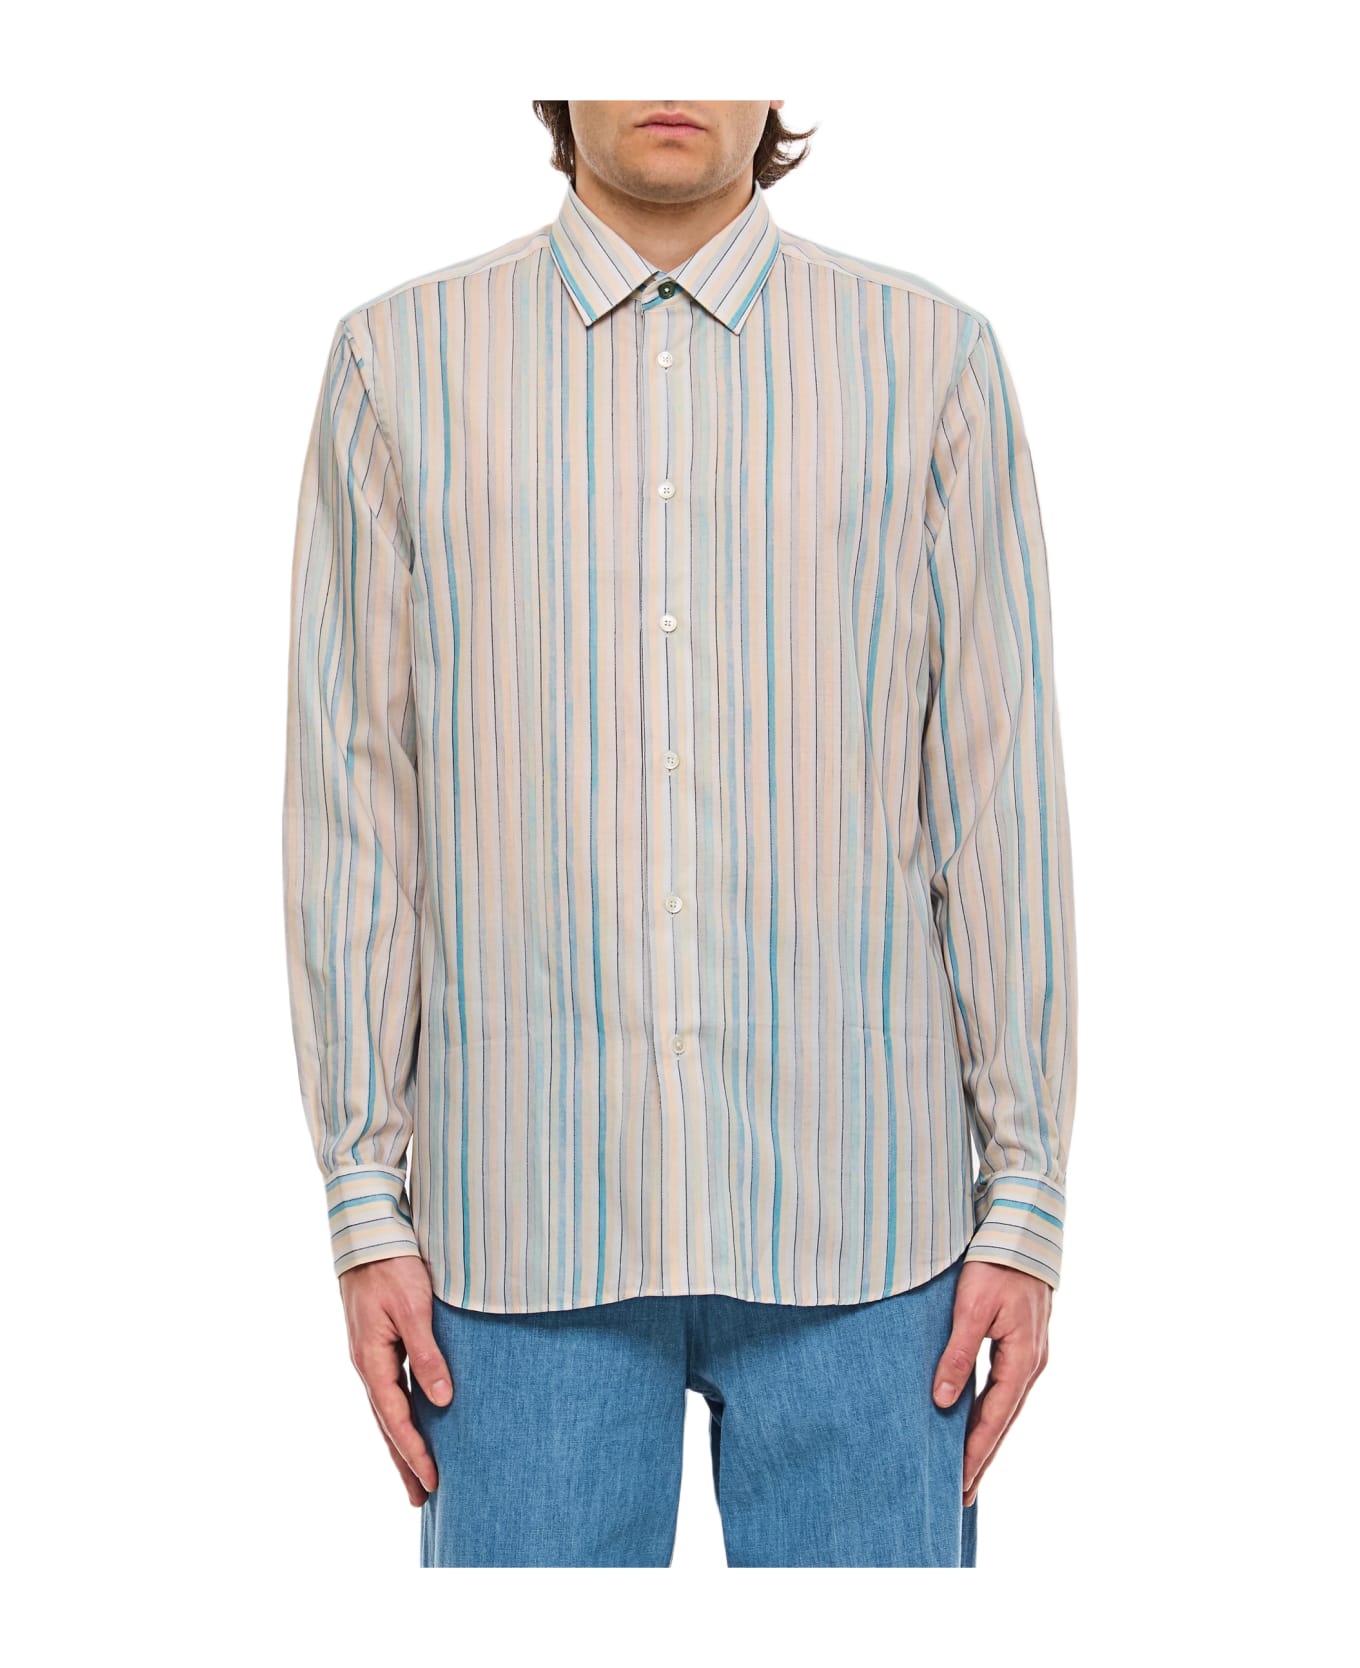 Paul Smith Tailored Fit Shirt - MultiColour